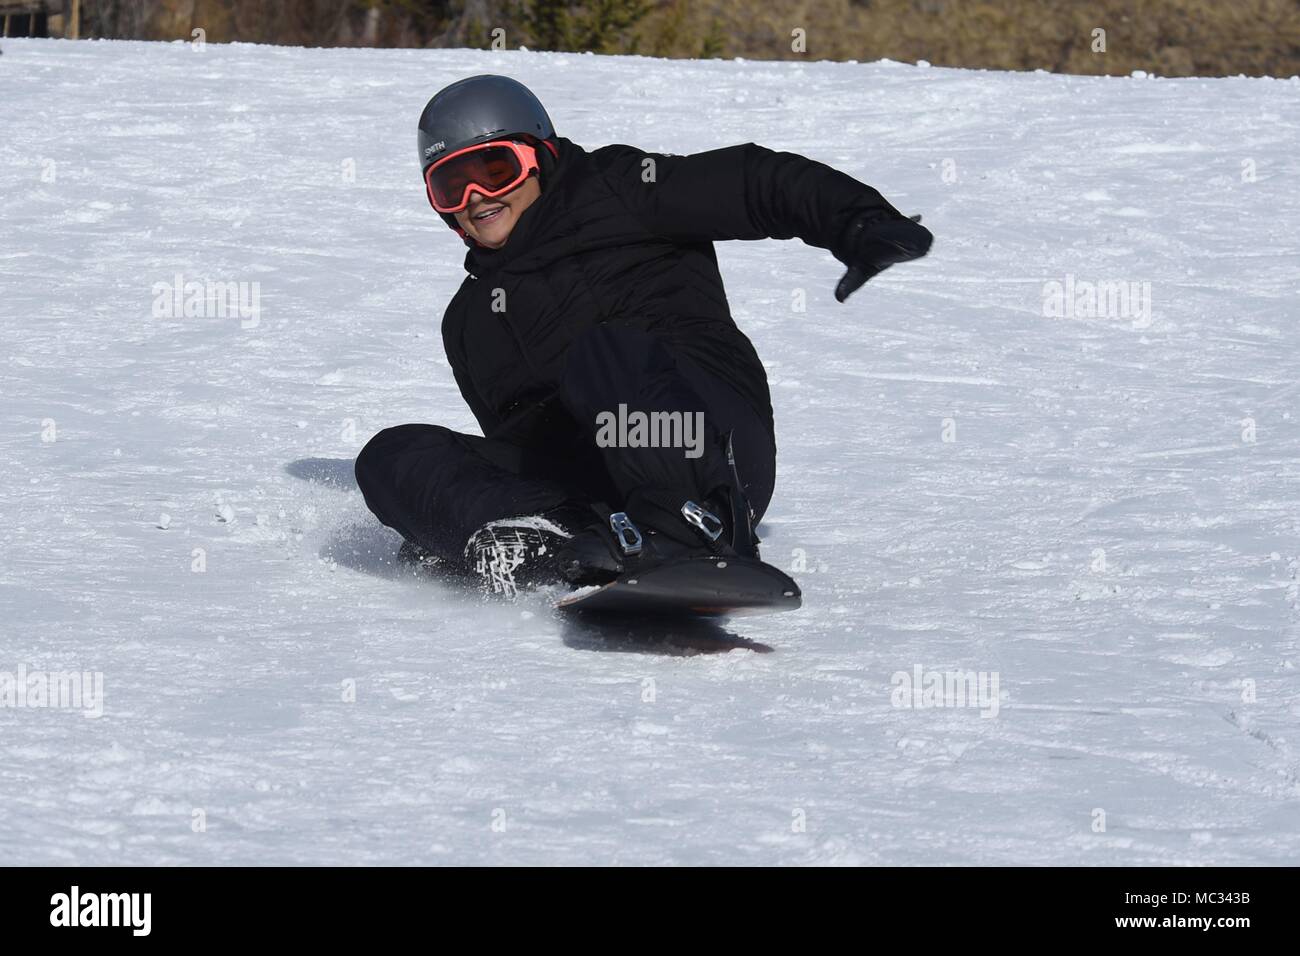 Senior Airman Emily Moreno, 50th Force Support Squadron career development journeyman, falls while snowboarding during the annual SnoFest at Copper Mountain, Colorado, Jan. 20, 2018. SnoFest brought Front Range military members together for a weekend of winter recreational activities. (U.S. Air Force photo by Airman 1st Class William Tracy) Stock Photo